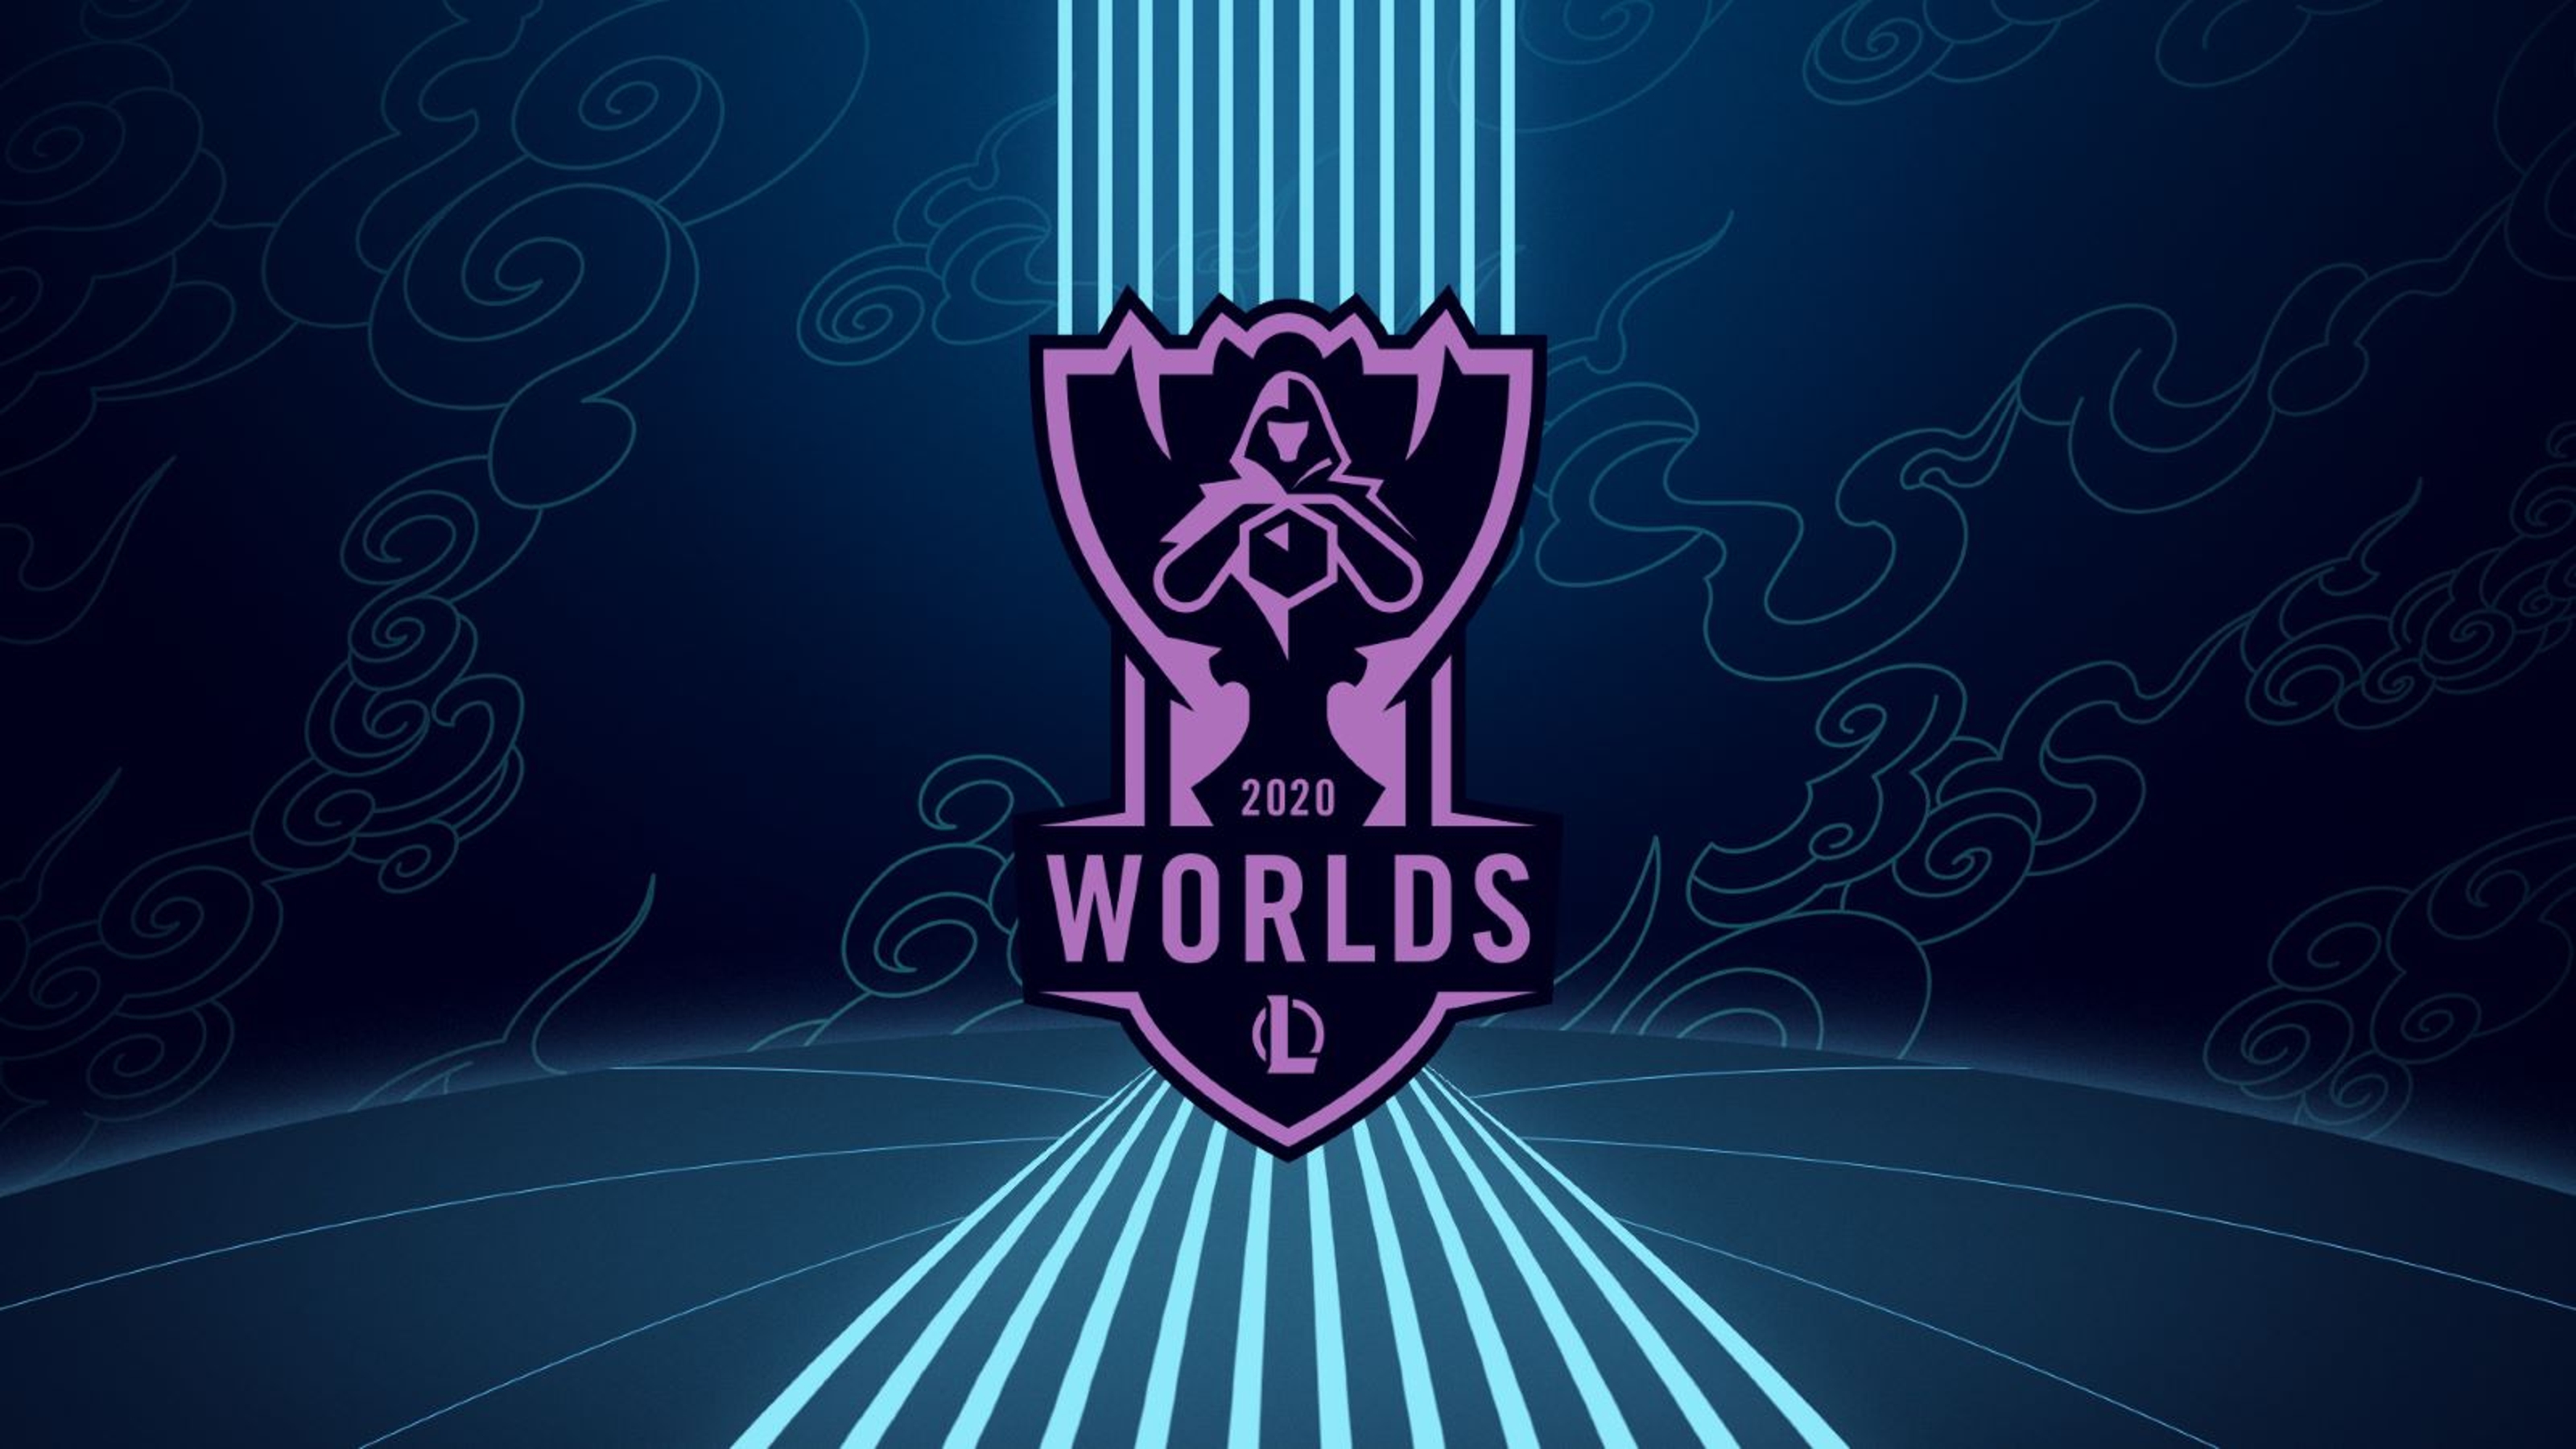 Ping Beware: Riot Games Partners With Cisco To Power LoL Esports